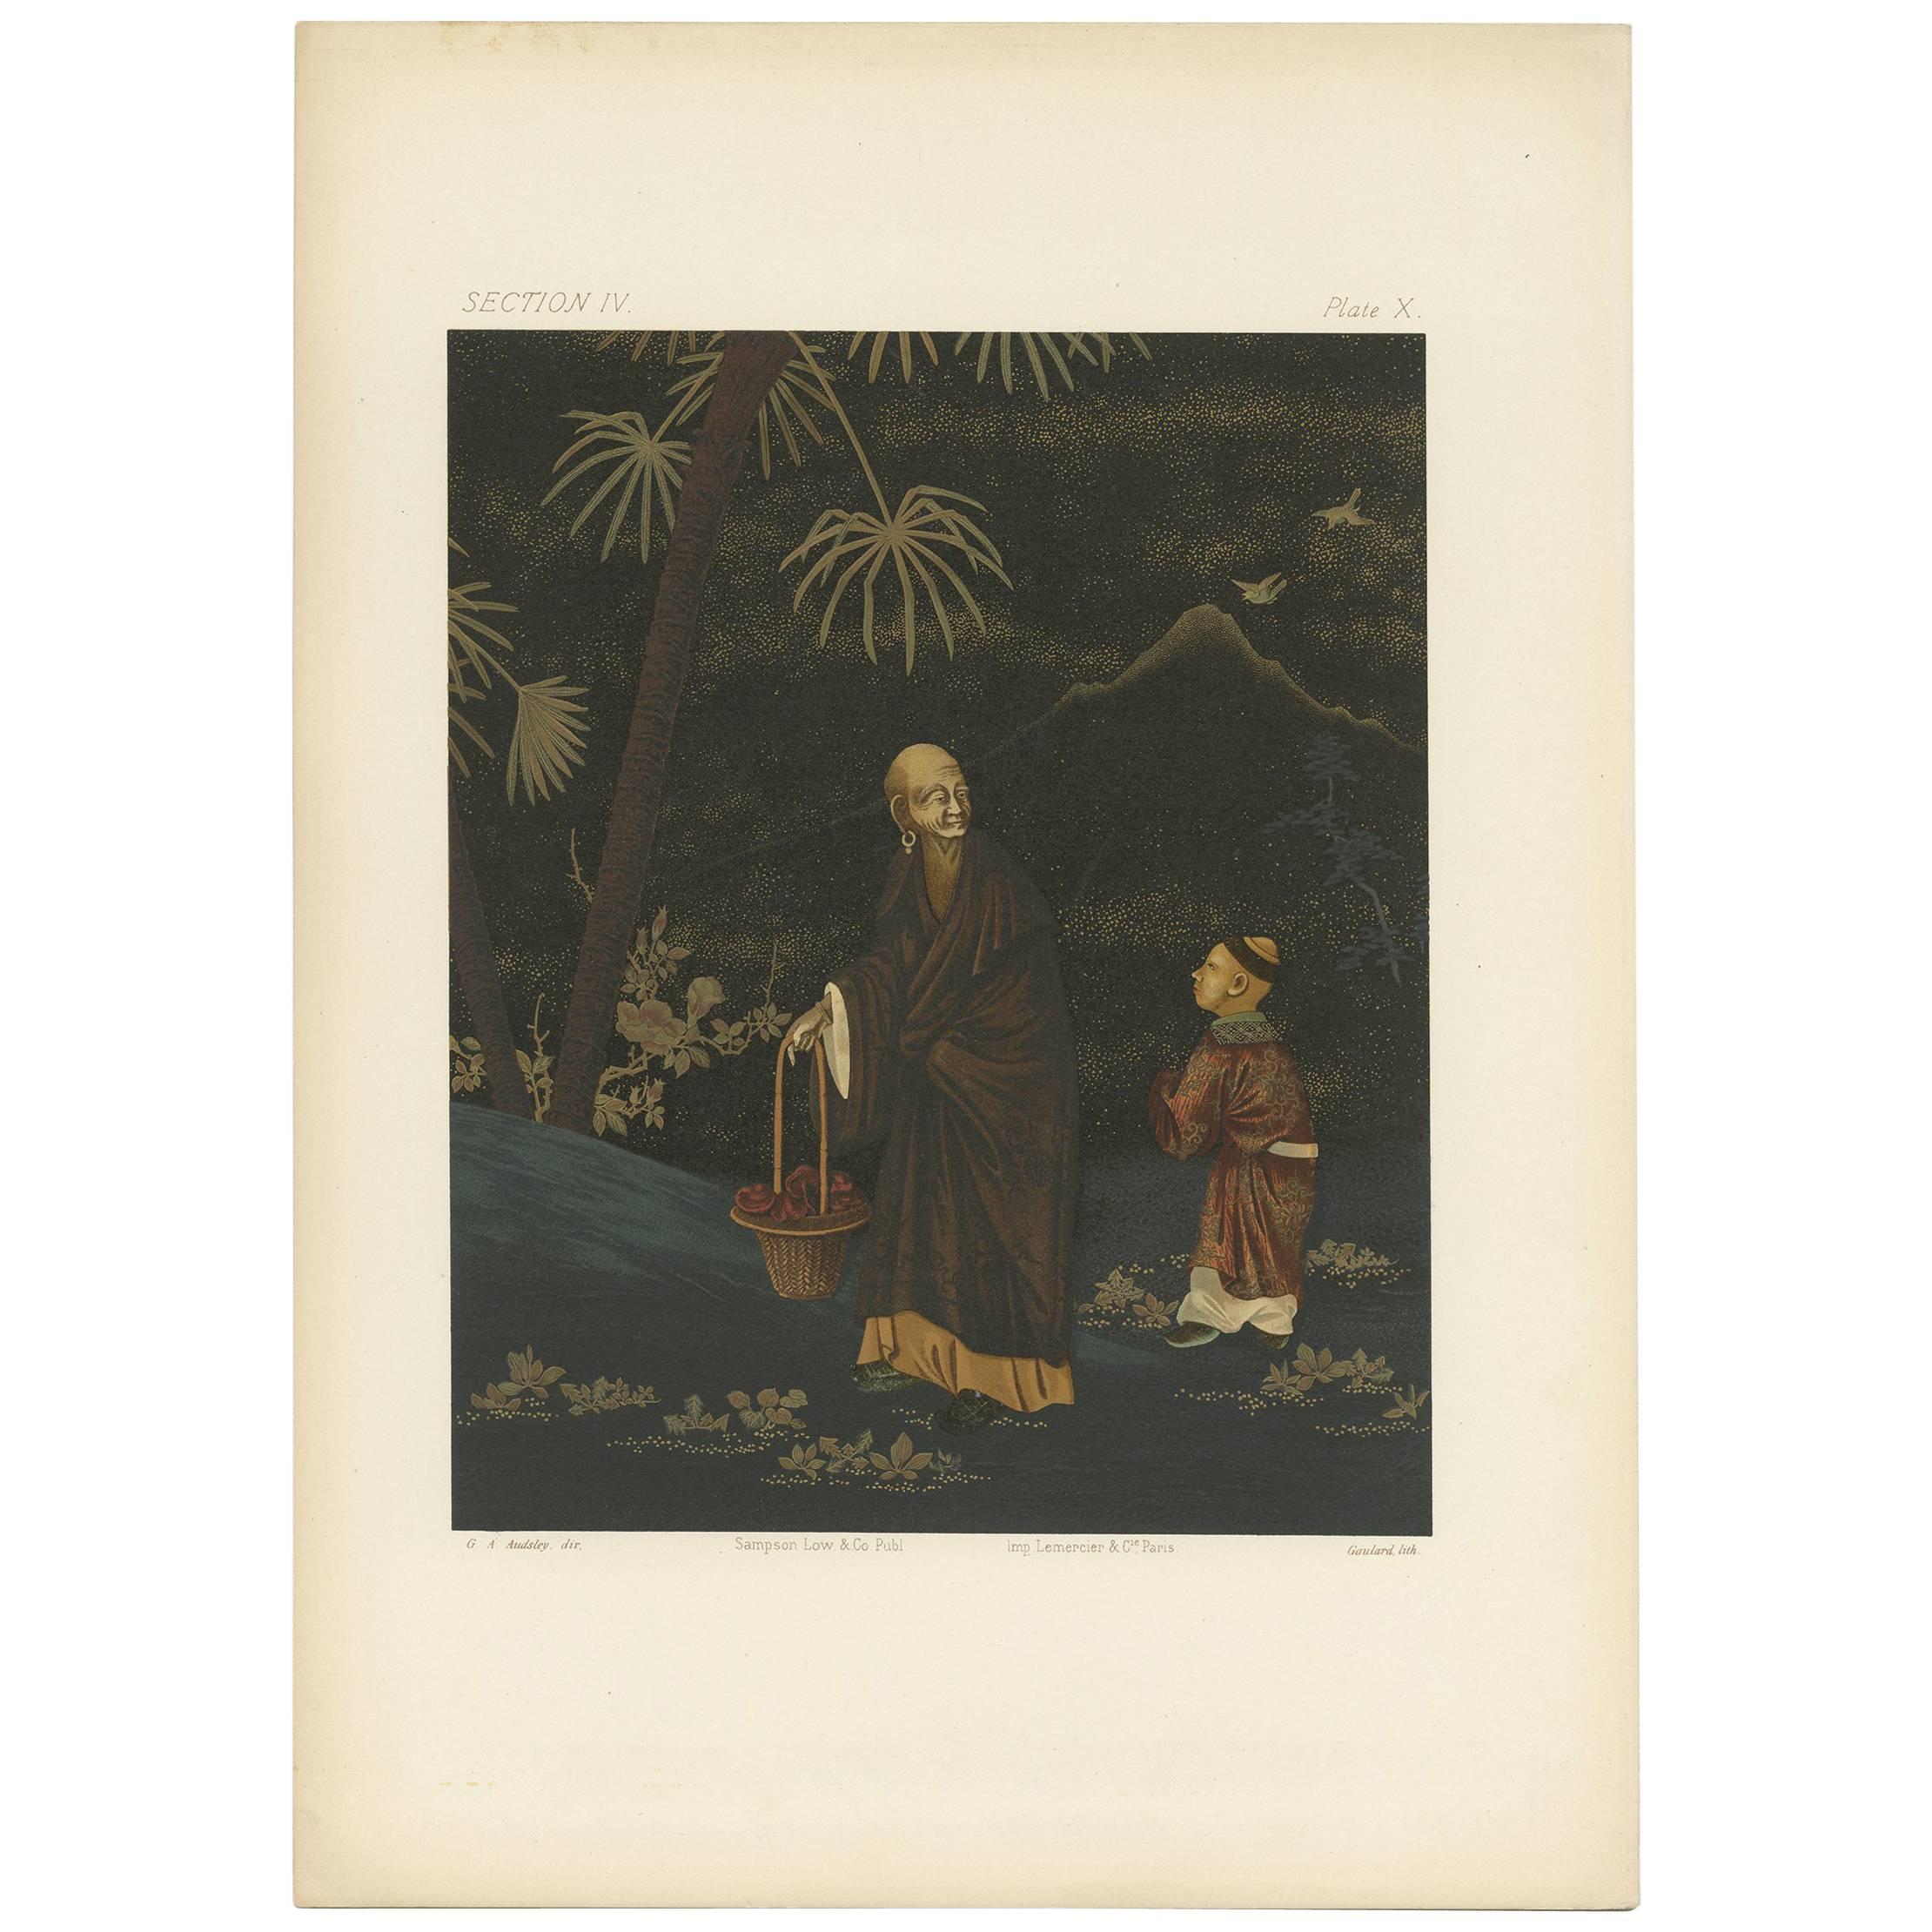 Antique Print of a Man and Boy ‘Japan, Lacquer’ by G. Audsley, 1882